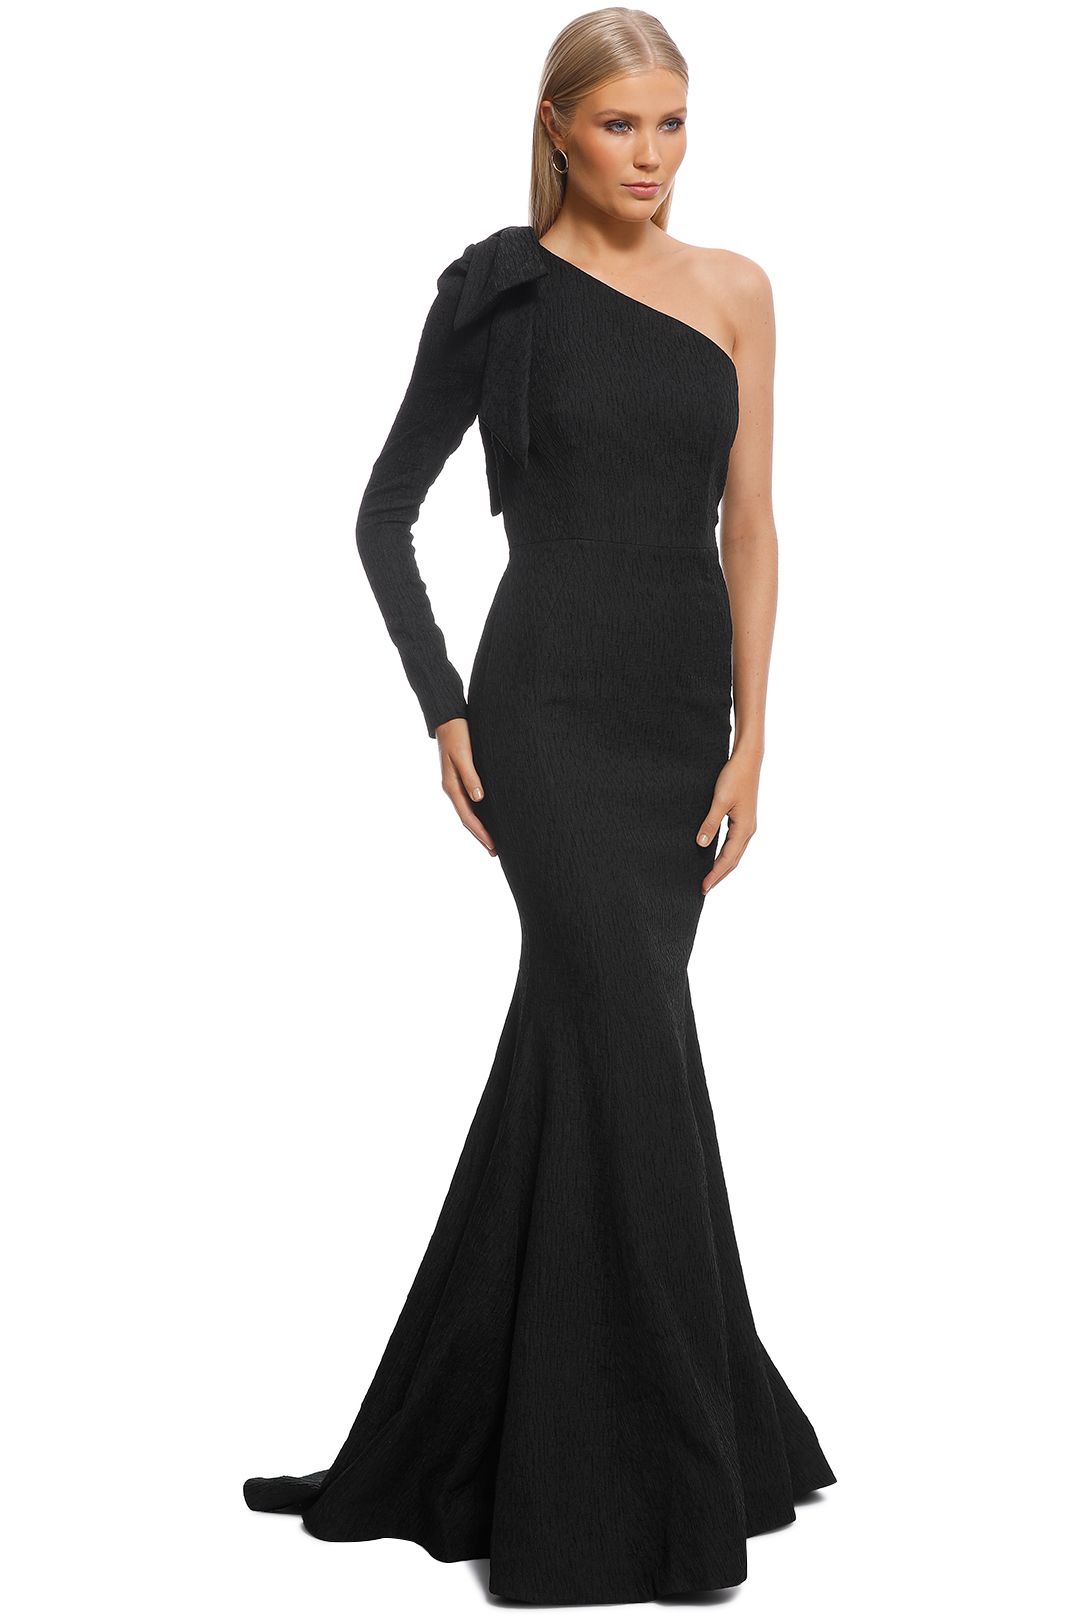 Rebecca Vallance - Harlow Bow Gown - Black - Side